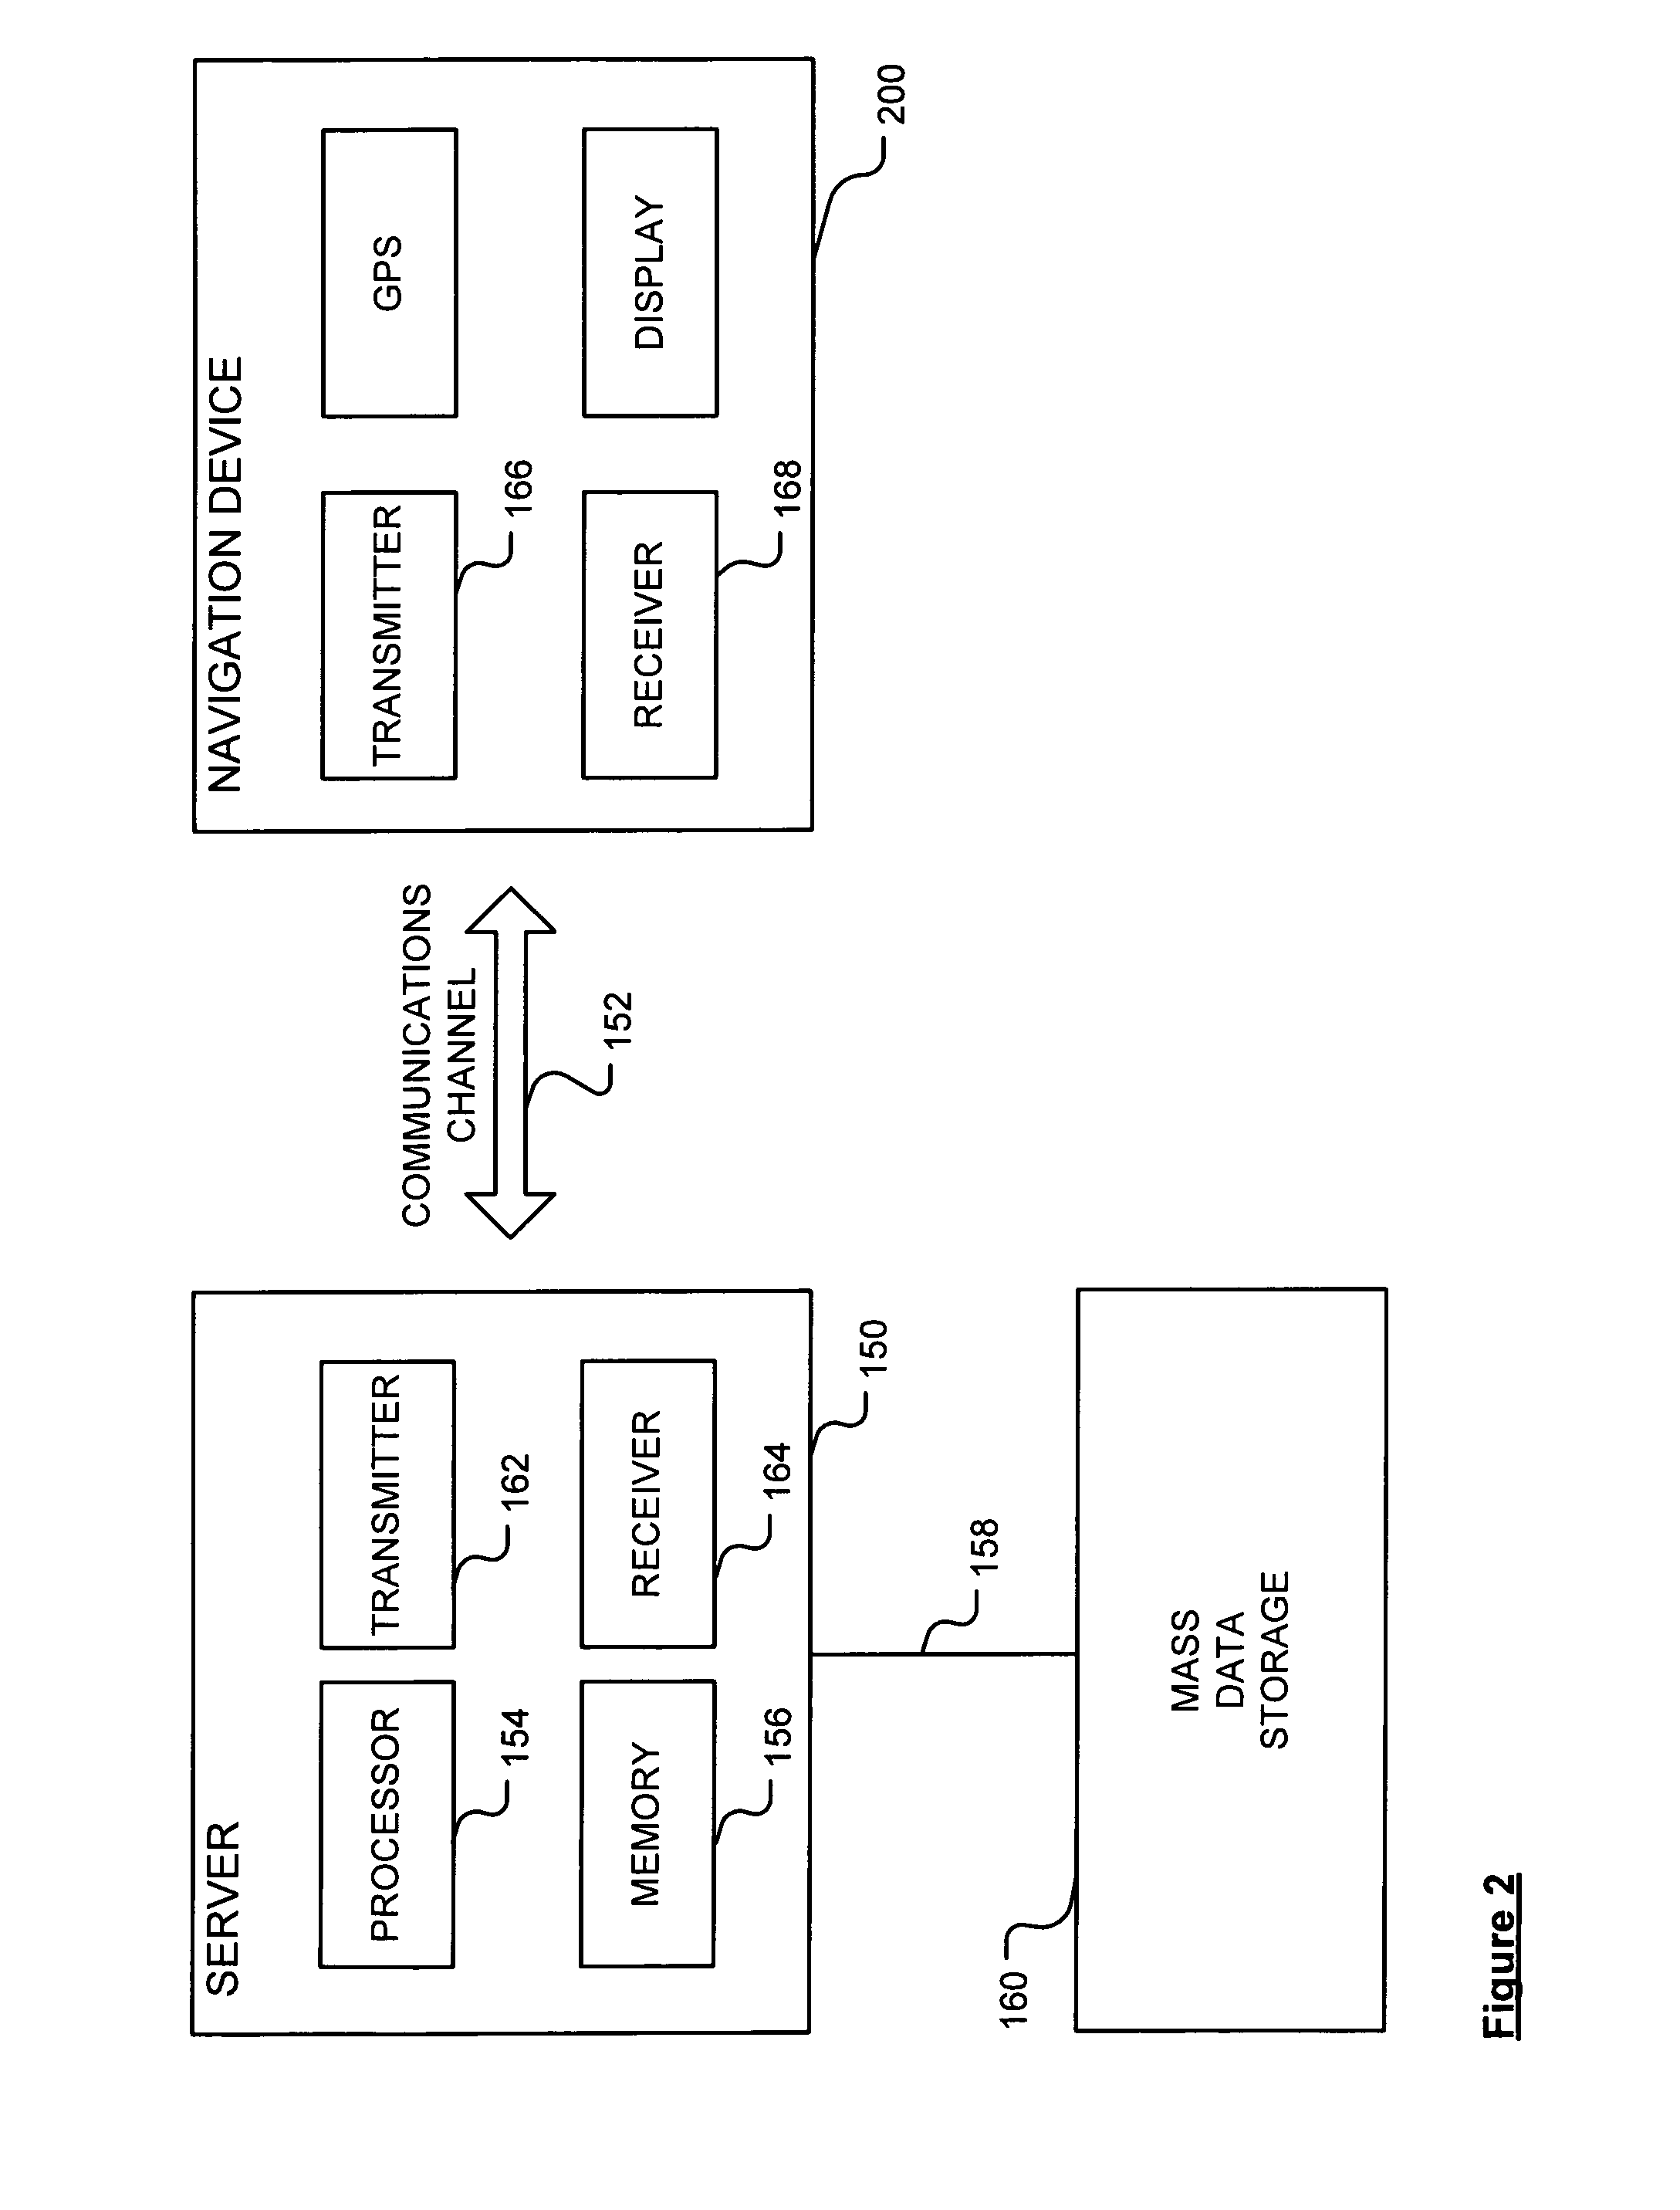 Data acquisition apparatus, data acquisition system and method of acquiring data